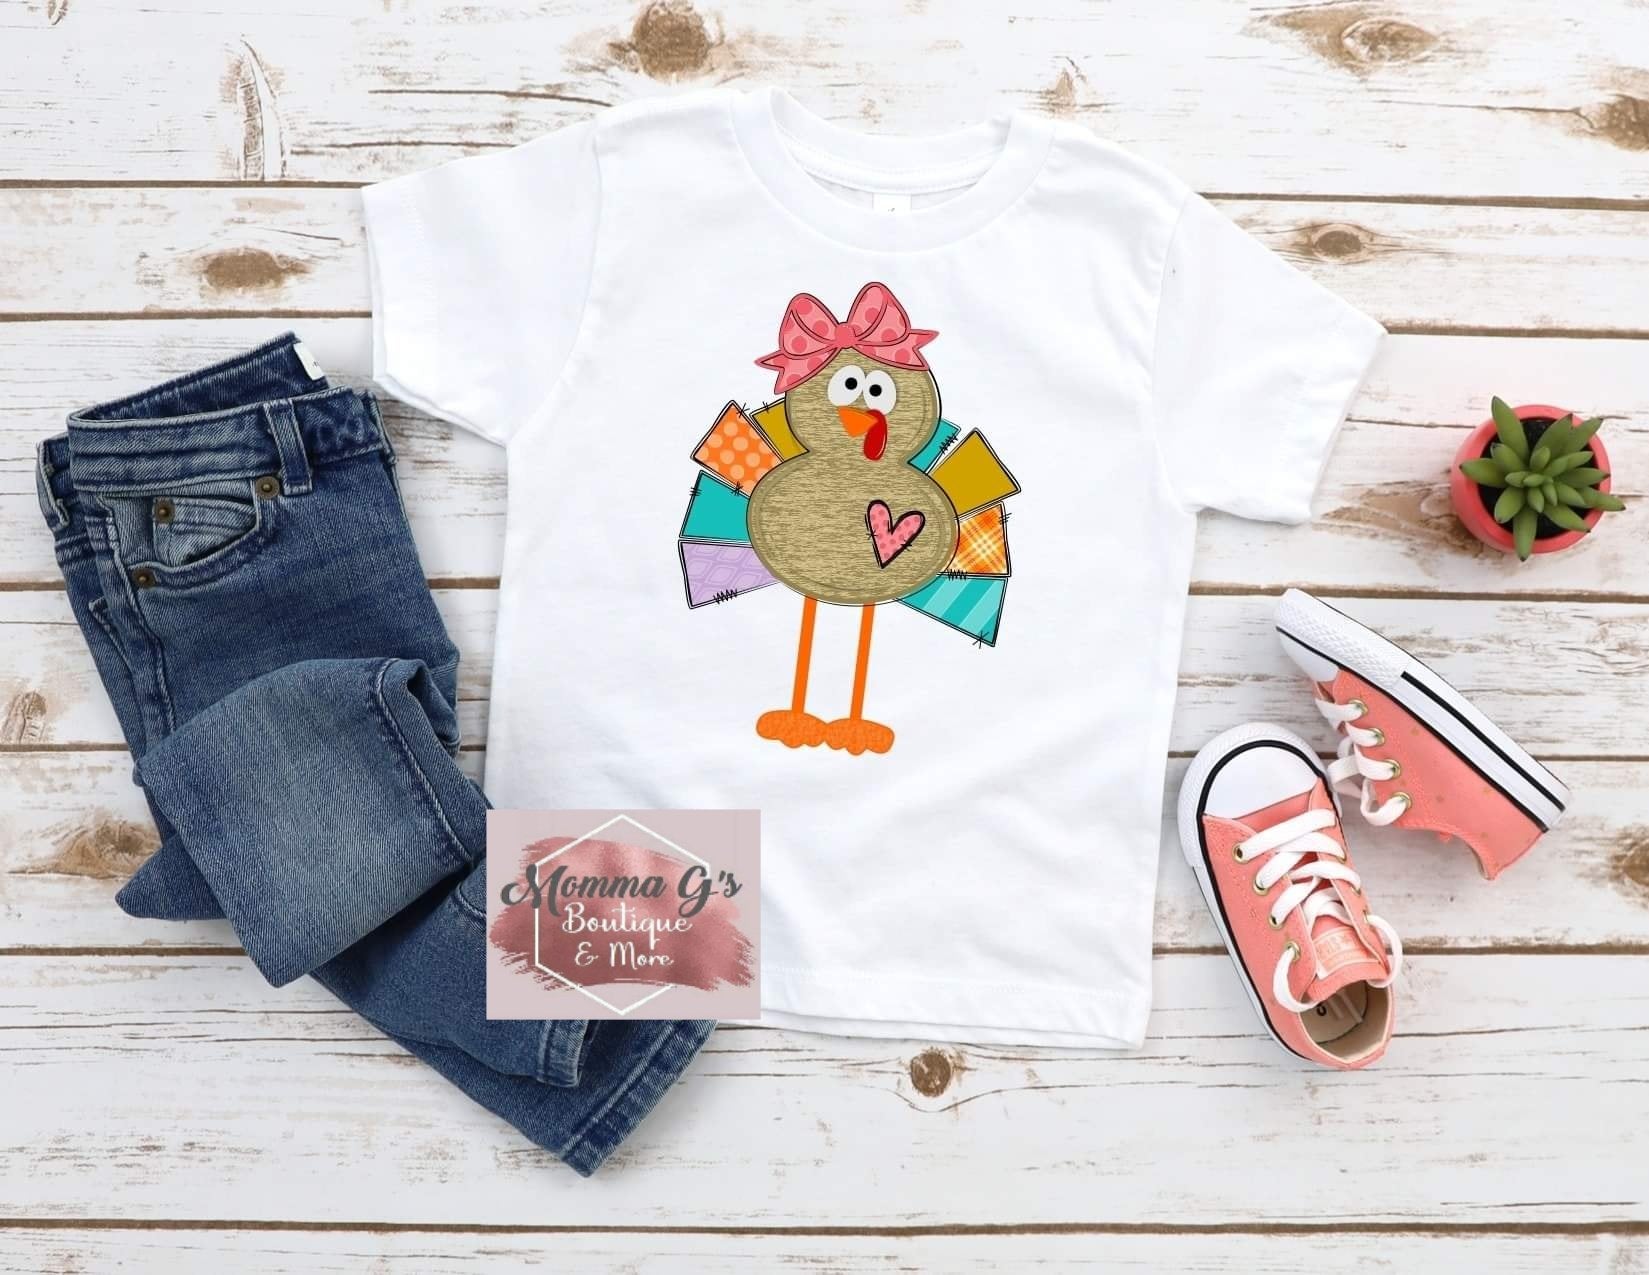 Turkey T-shirt for Mom and girl - Momma G's Children's Boutique, Screen Printing, Embroidery & More